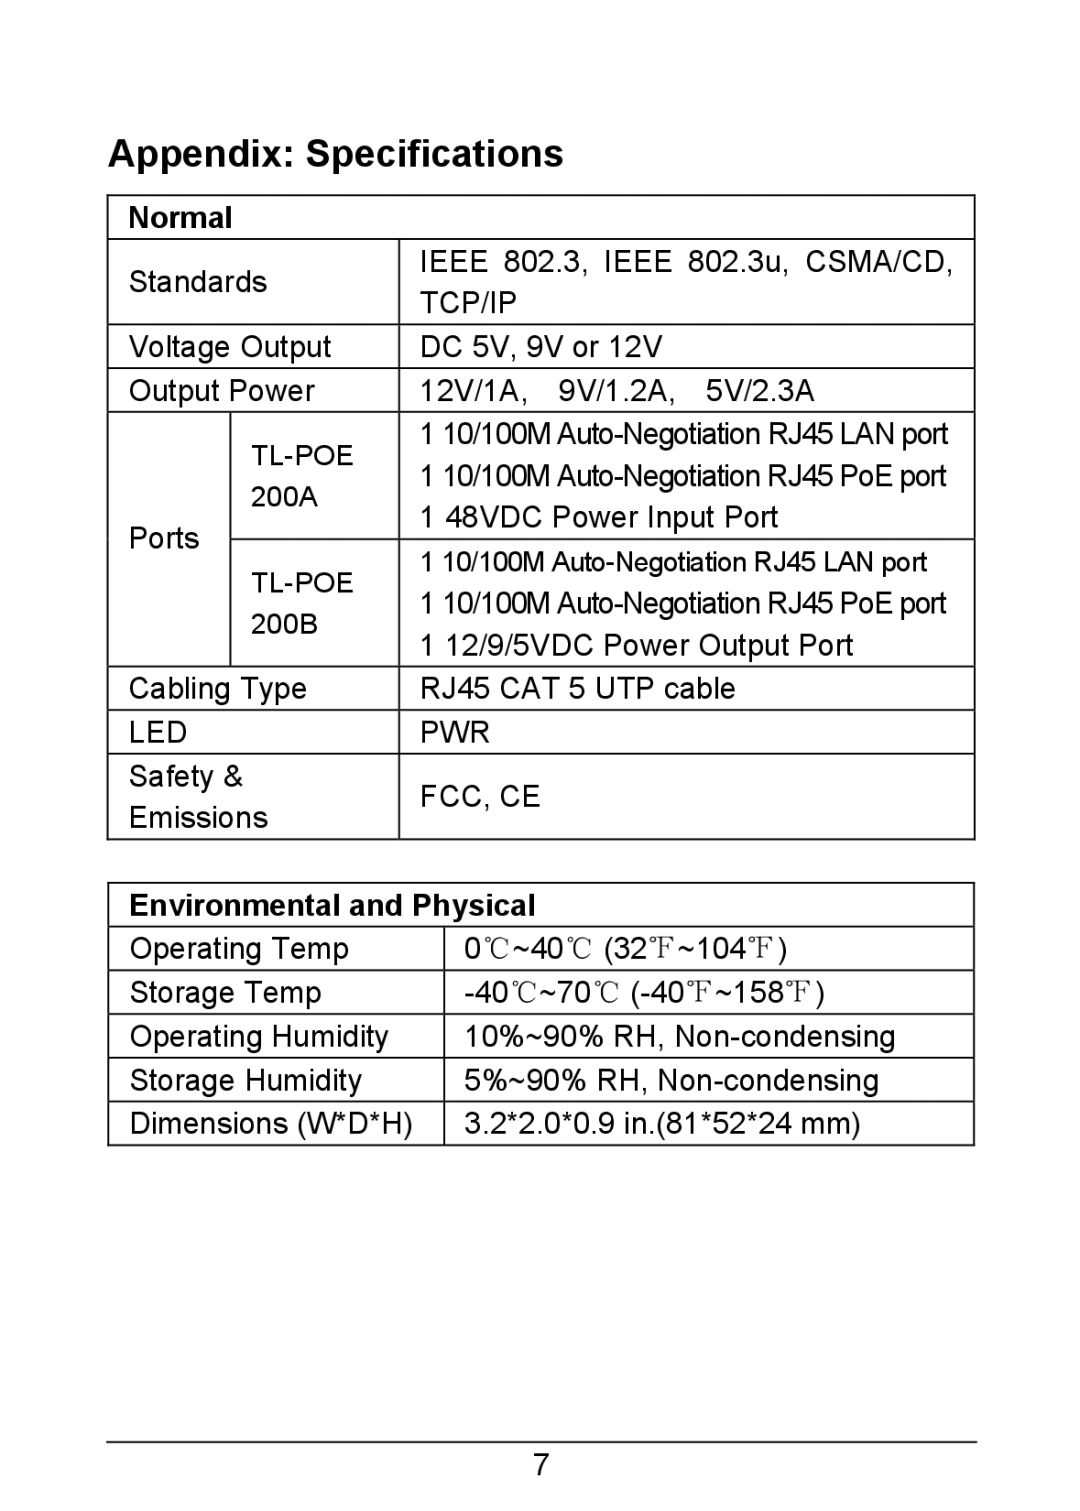 TP-Link TL-POE200 manual Appendix Specifications, Normal, Environmental and Physical 